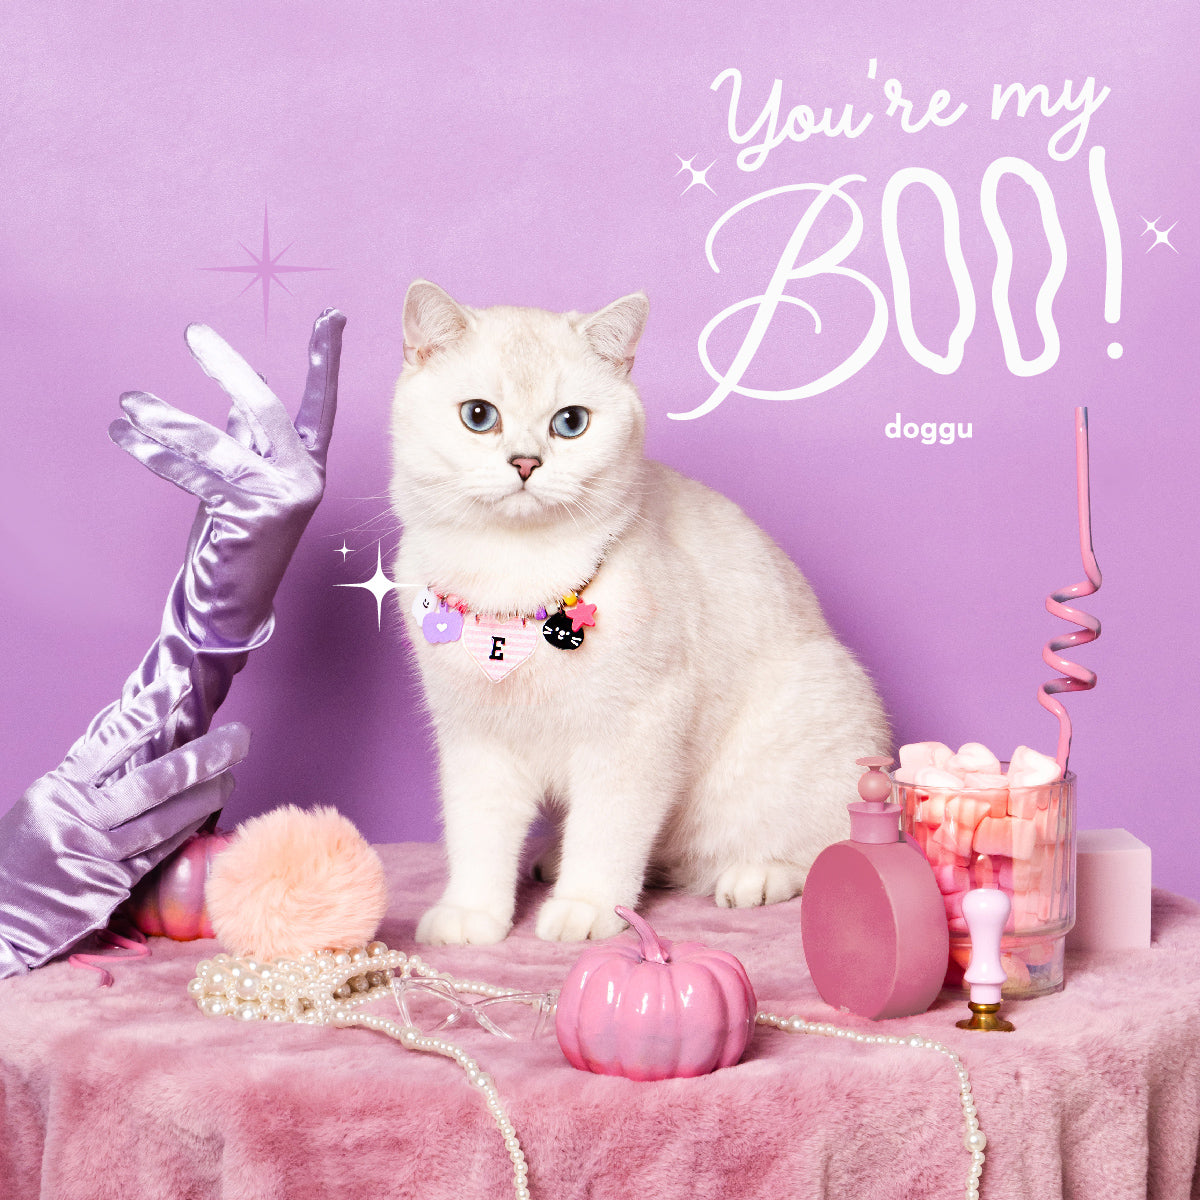 Create your own : You're my Boo!